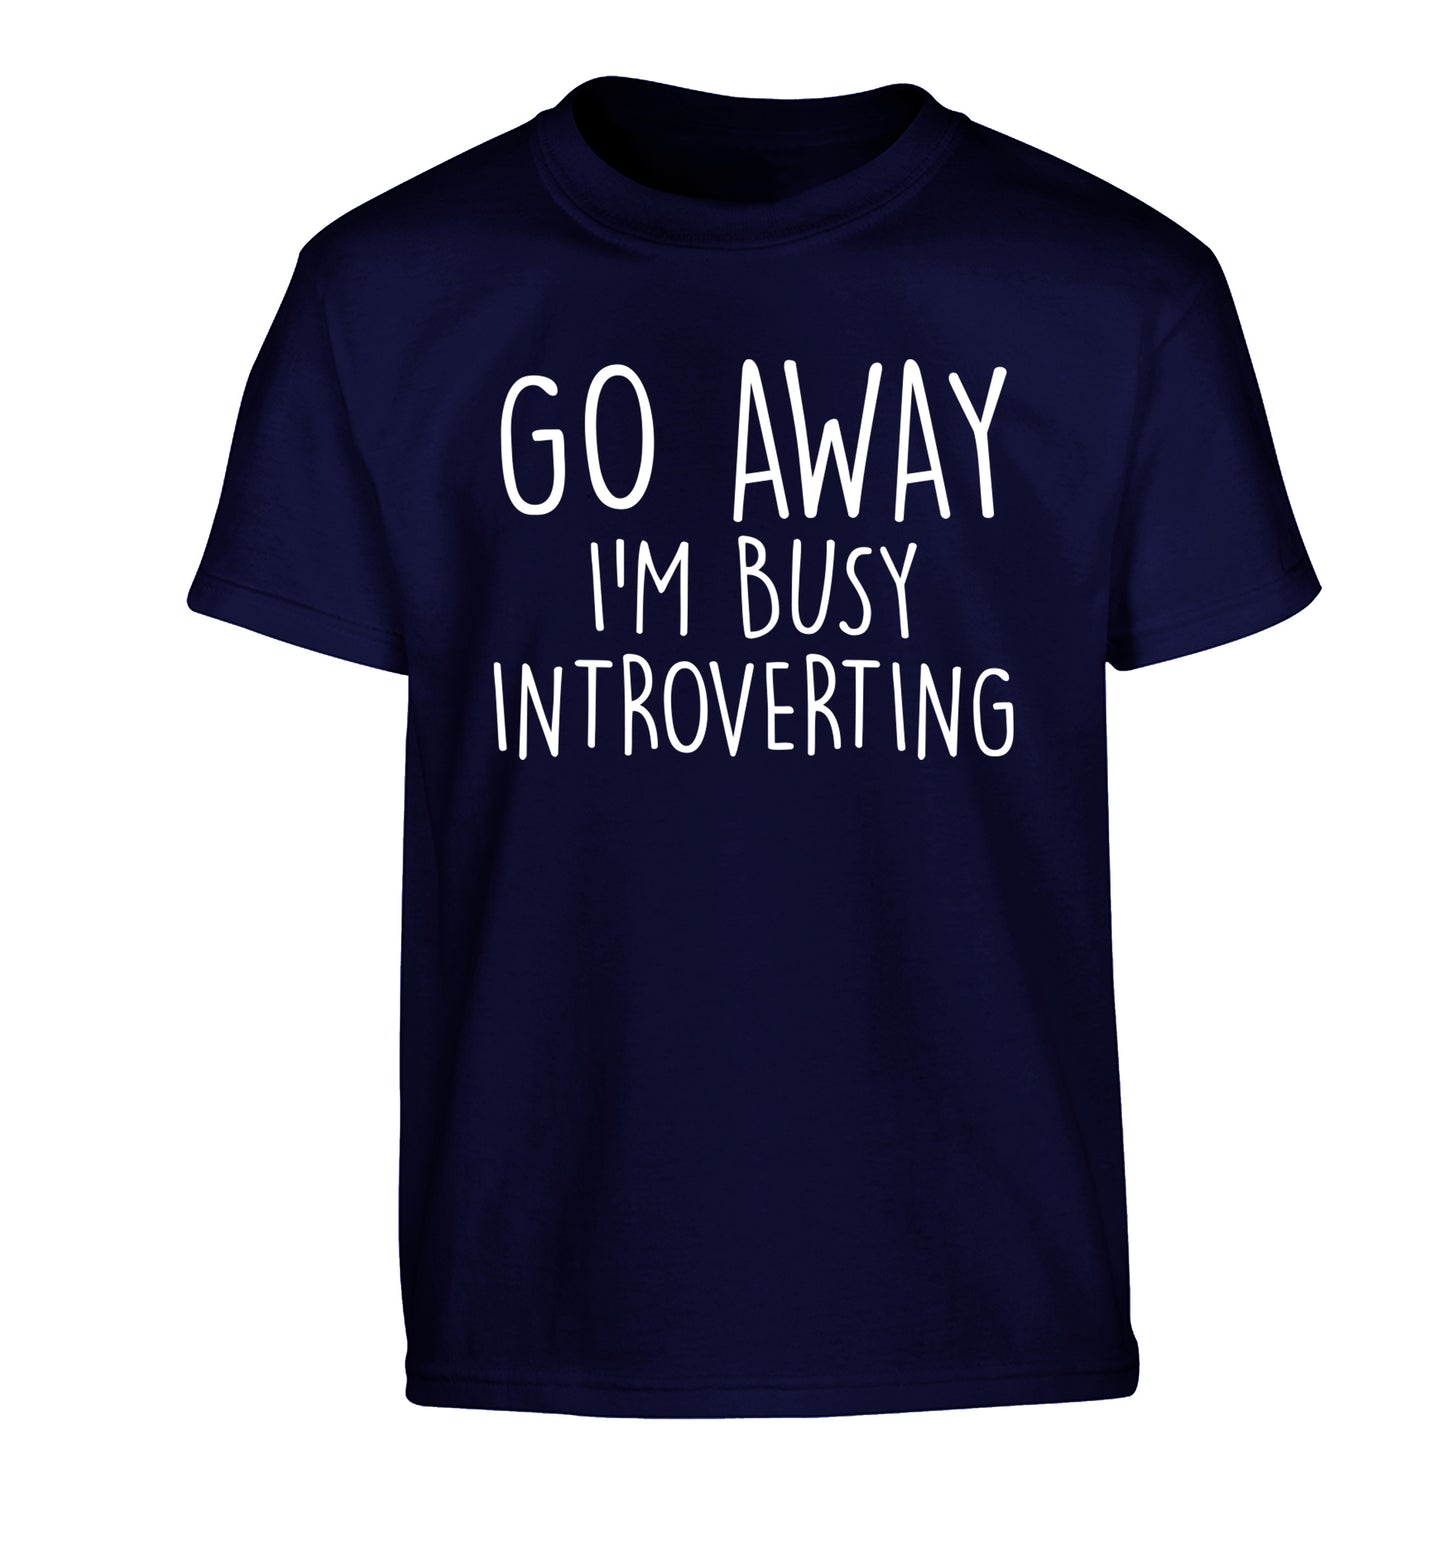 Go away I'm busy introverting Children's navy Tshirt 12-13 Years